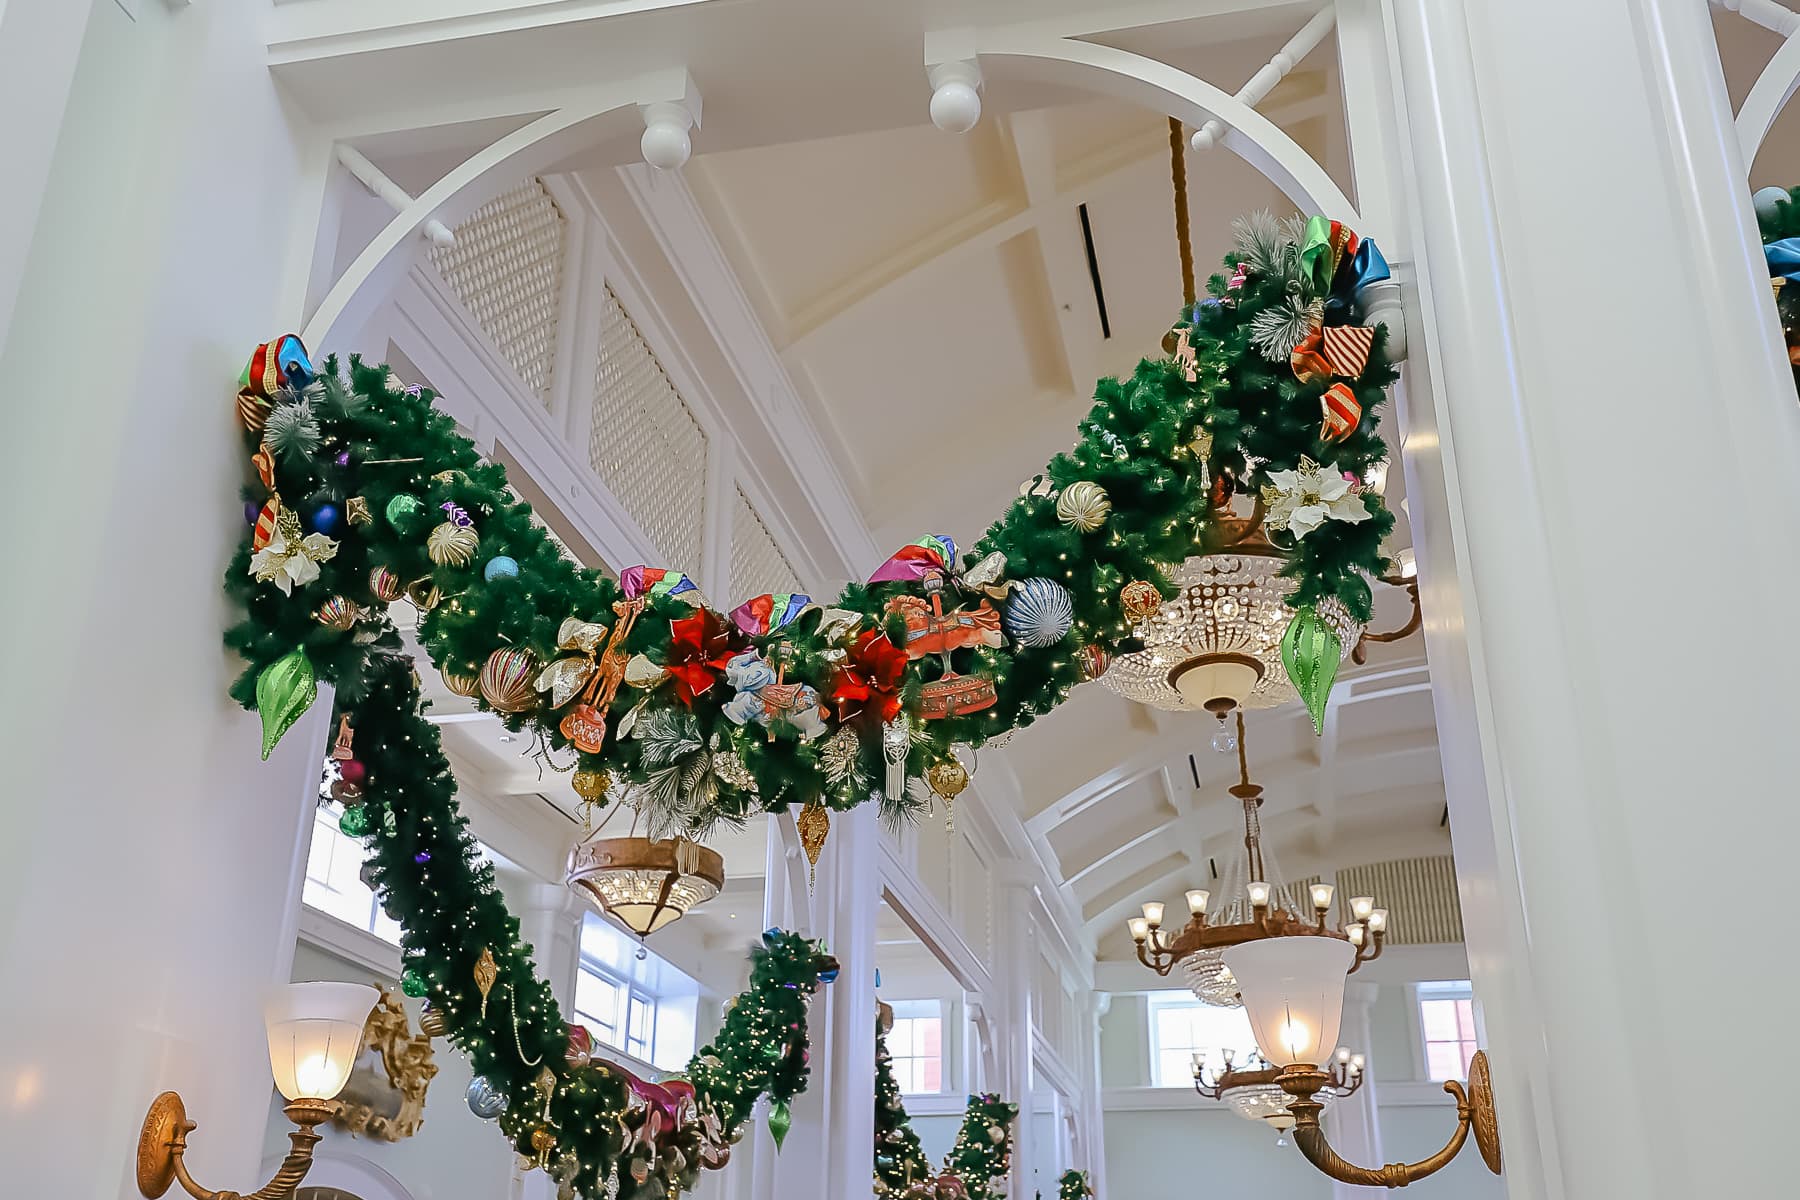 swags of garland hung in the lobby of Disney's Boardwalk at Christmas 